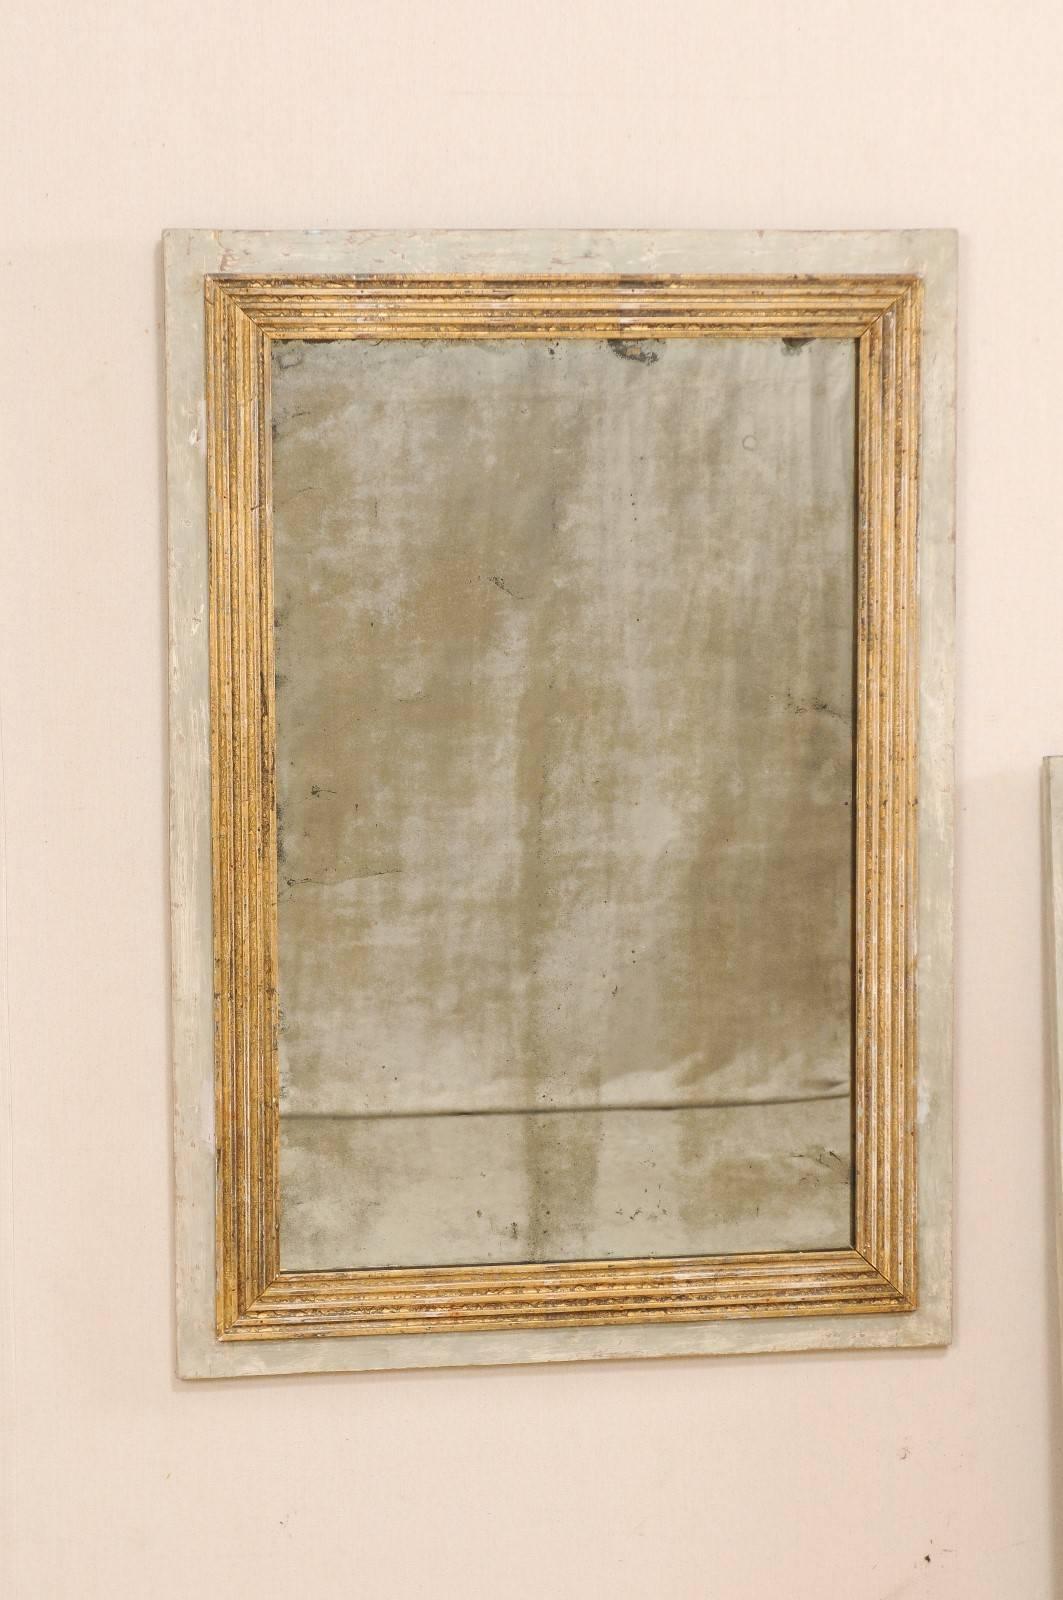 A pair of French 19th century painted wood mirrors. This pair of antique French mirrors is simple and elegant in design, with emphasis around their inner surround which features straight-lined reeded molding framed within a clean outer frame. These